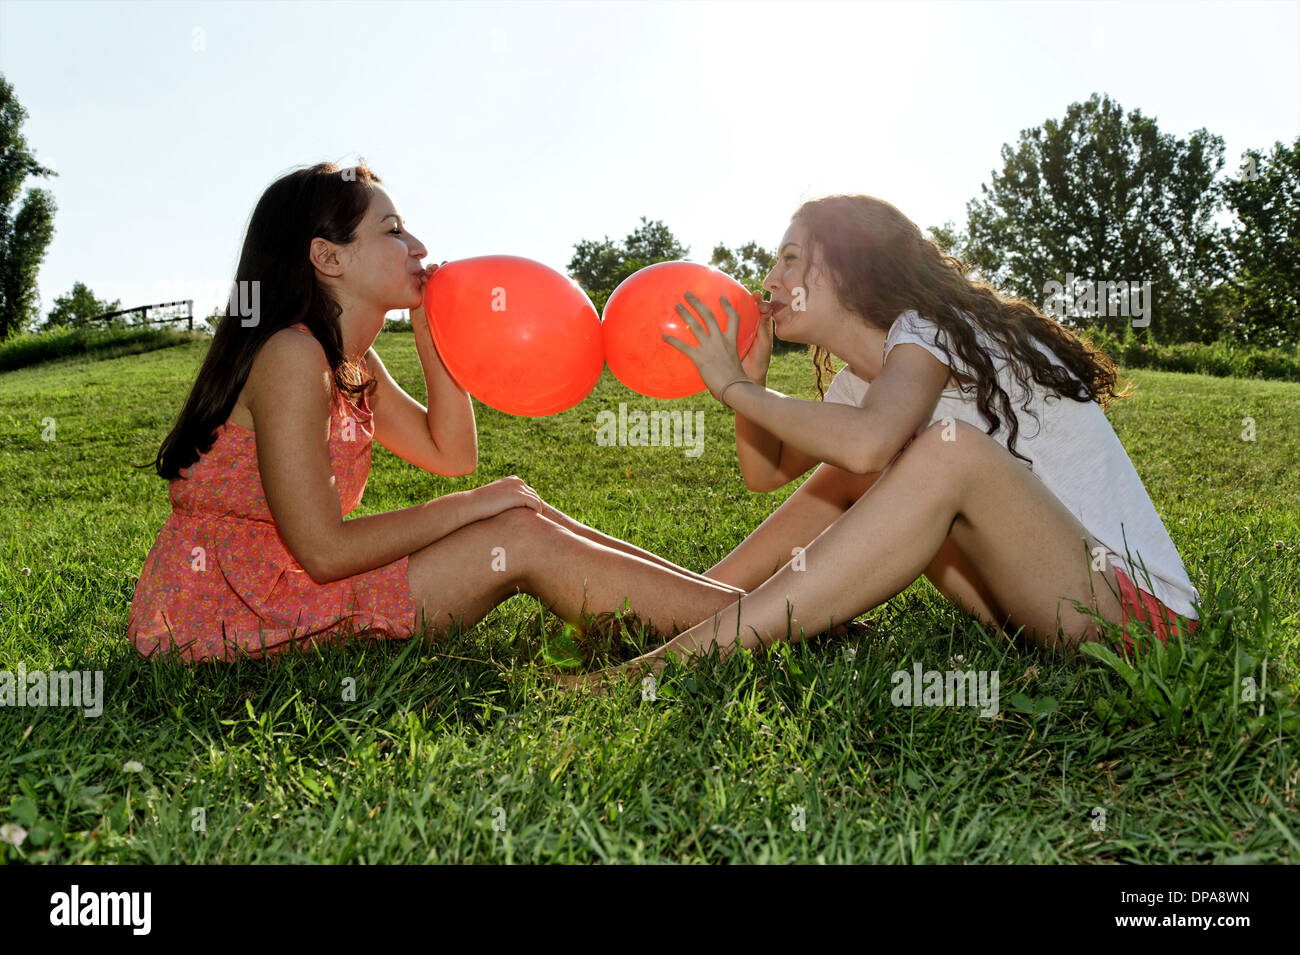 Two young women sitting on grass bowing up red balloons Stock Photo